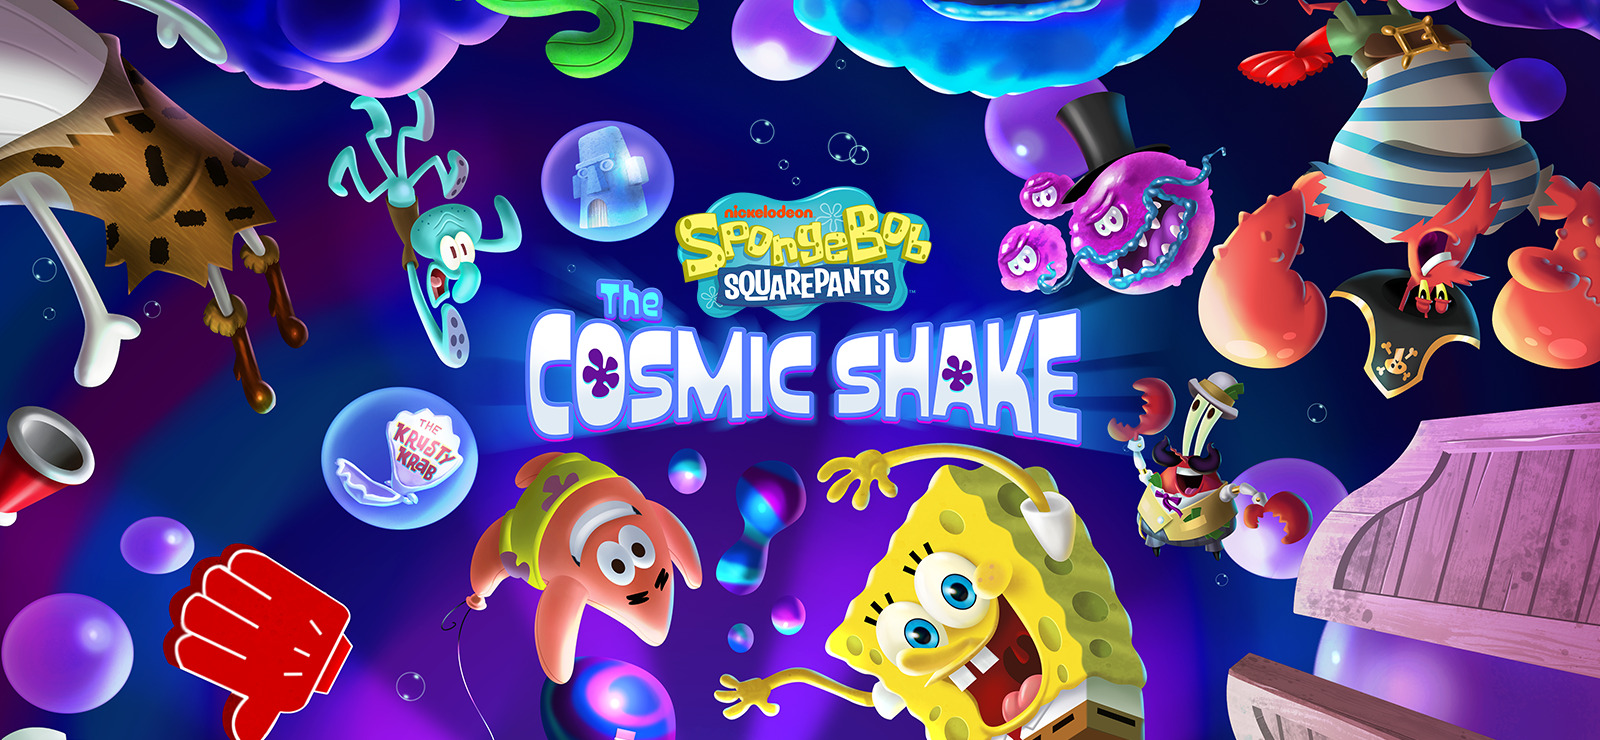 SpongeBob SquarePants: The Cosmic Shake Review - Not Quite A Sweet Victory  - Game Informer